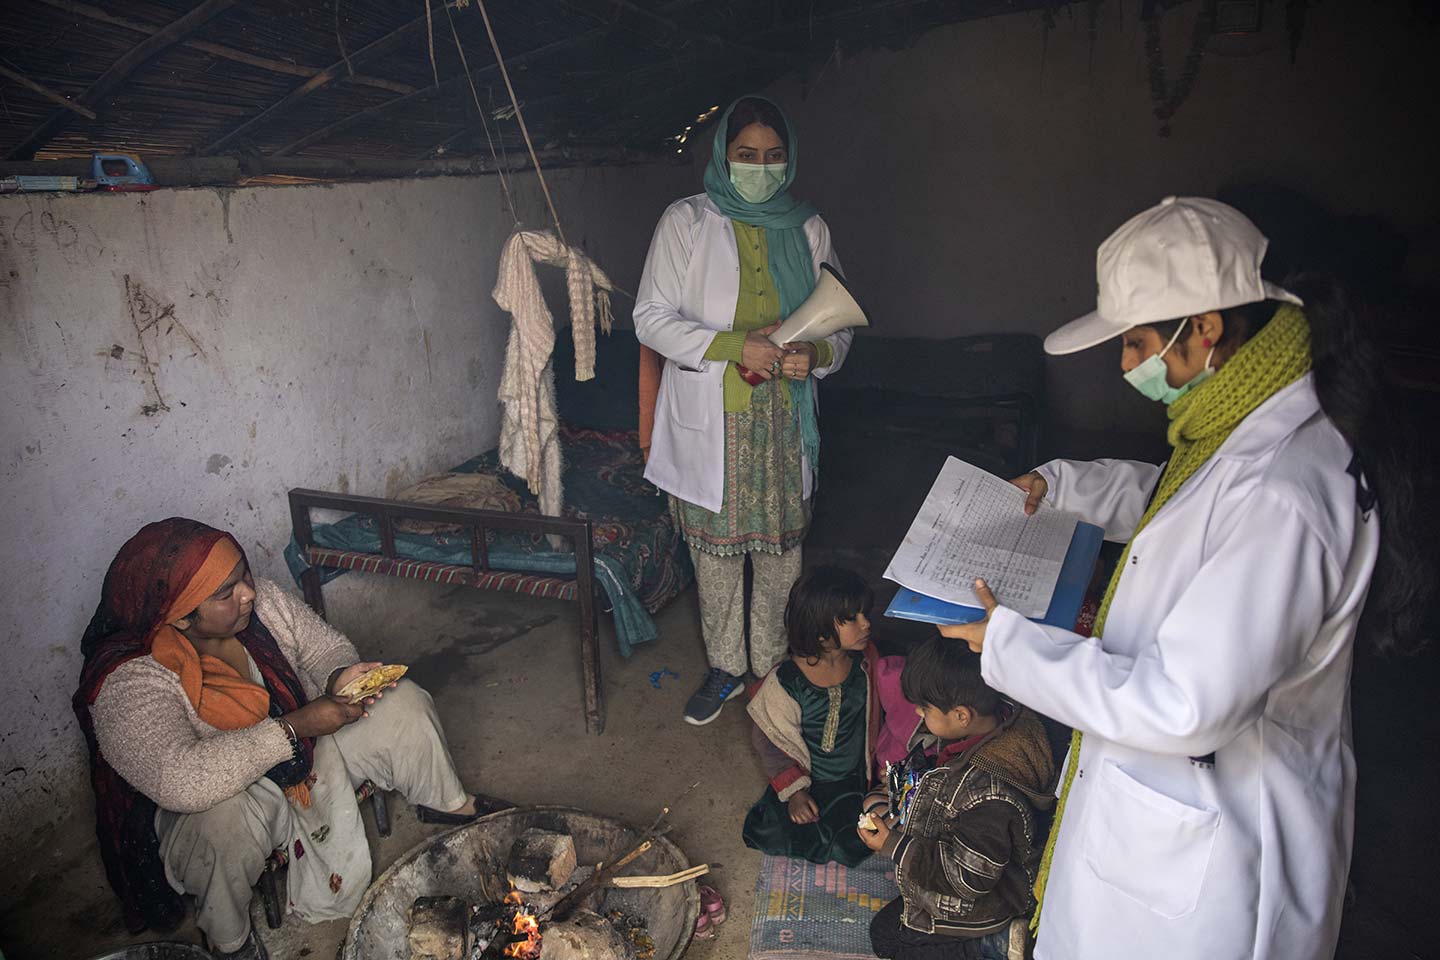 Sadaf Fareed, with her team checking the vaccination record of a child during their field work in a slum in Islamabad.  Credit: Gavi/2020/Asad Zaidi 